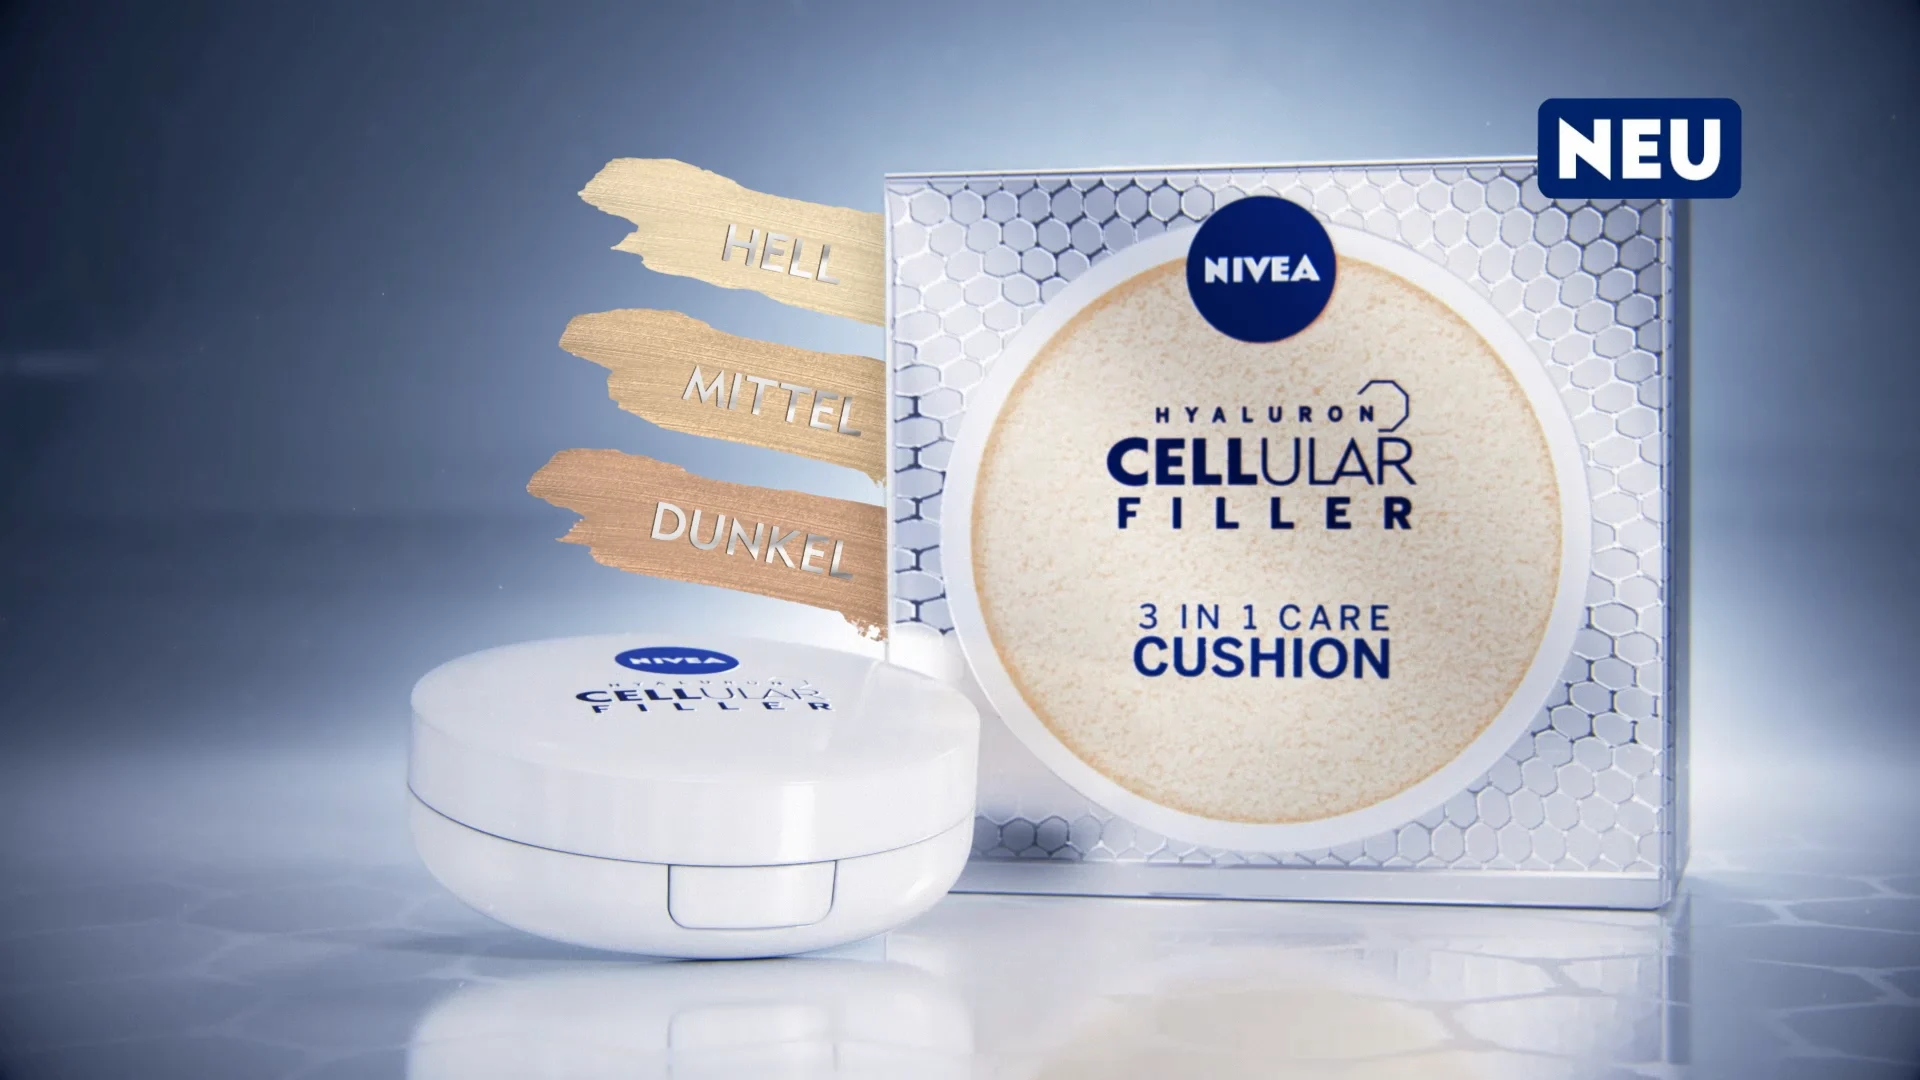 a closed nivea make up packshot next to the its associated folding box in front of an undefined background. behind the folding box there are three colored bars with the words HELL, MITTEL and DUNKEL on it